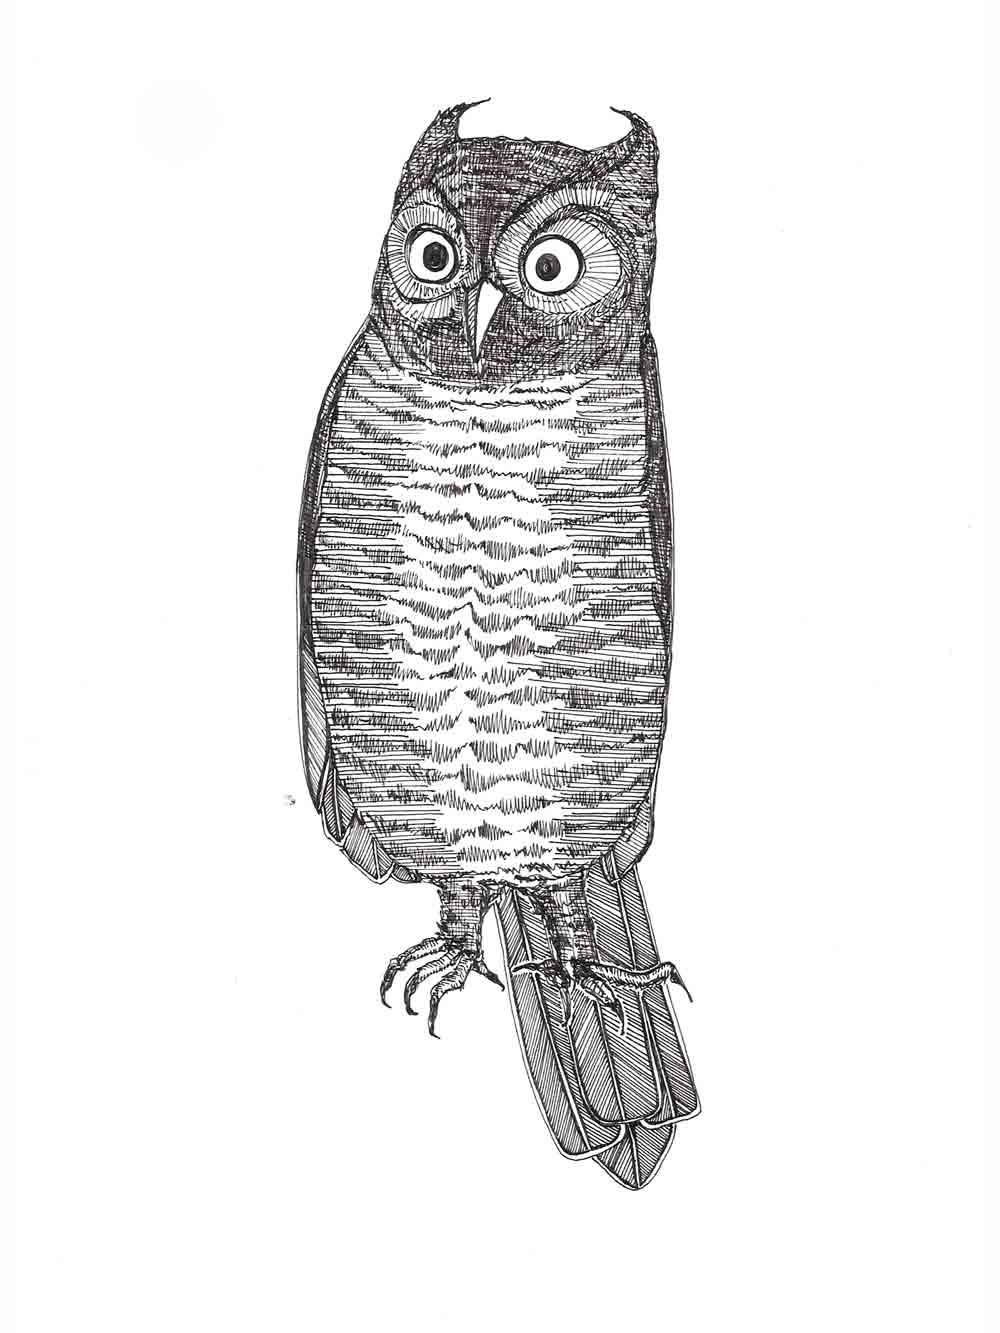 indignant owl ink drawing